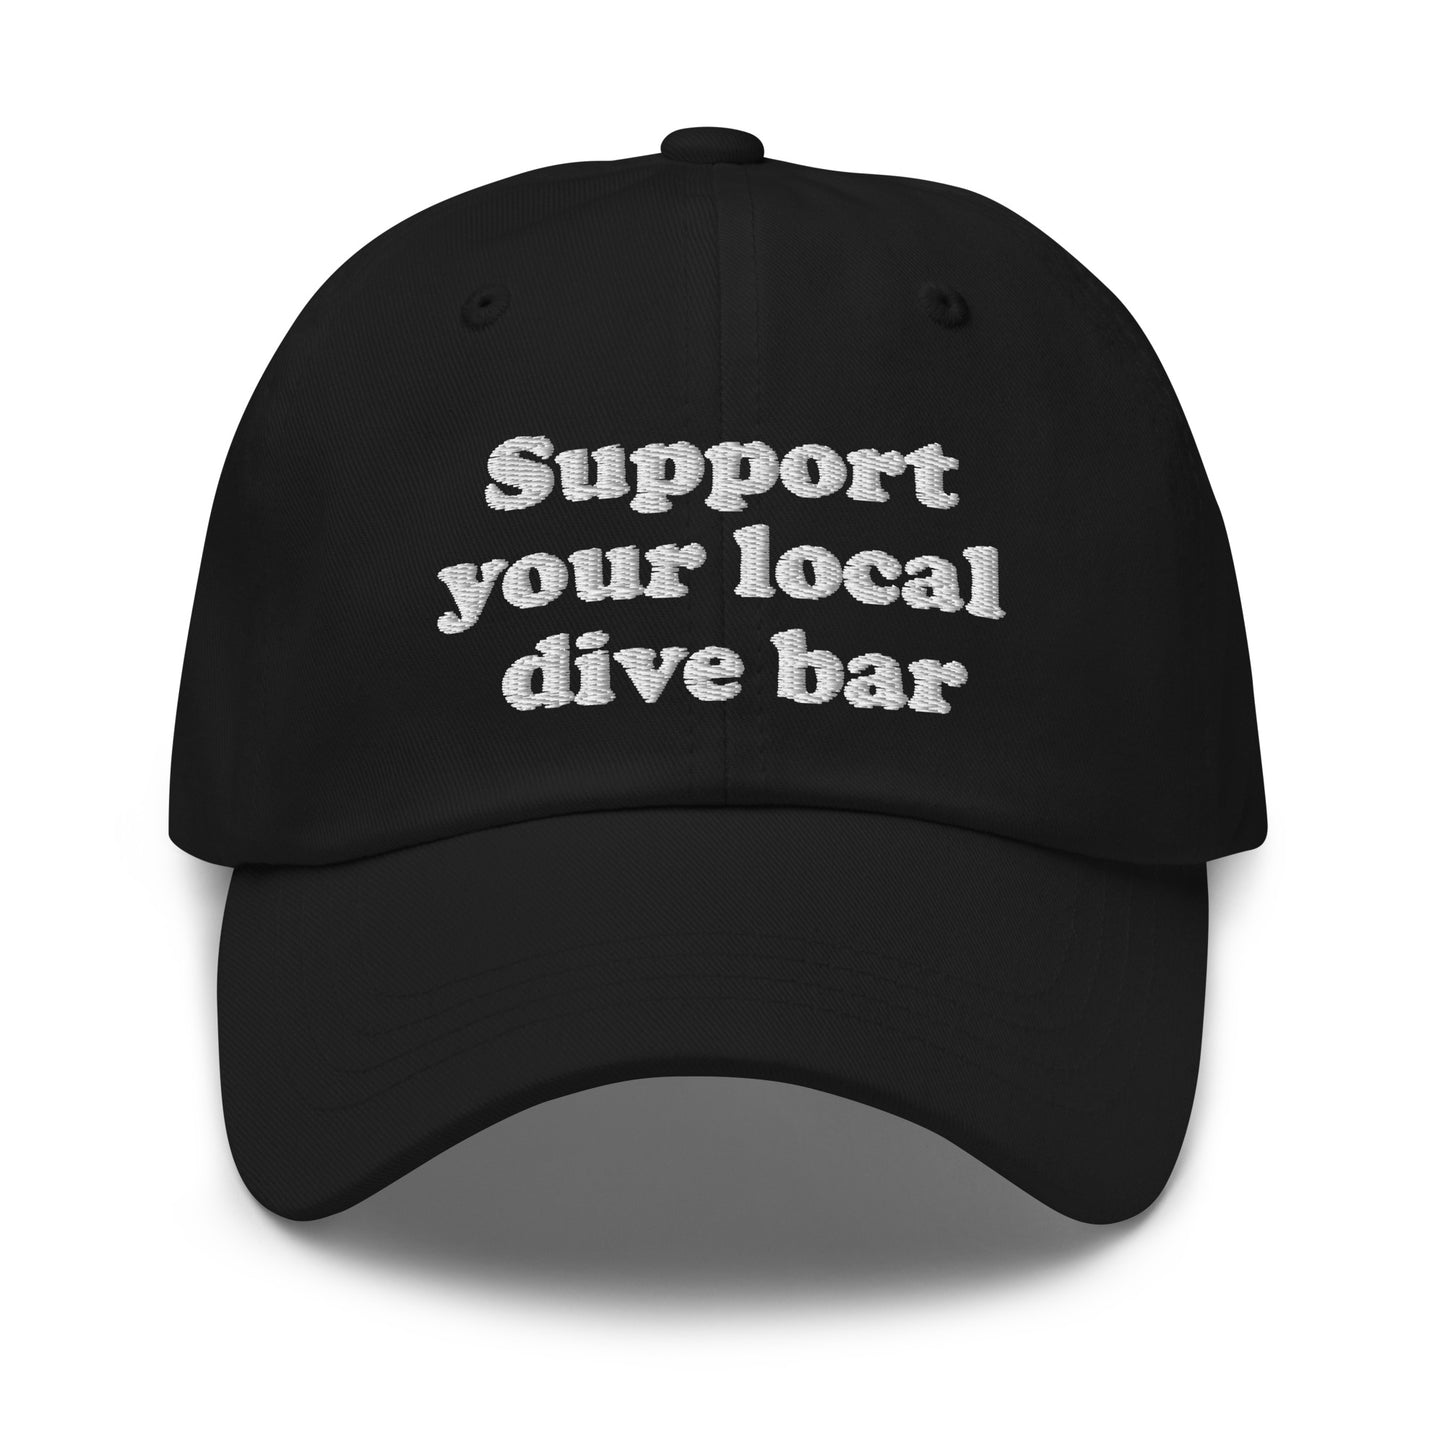 Support your local dive bar dad hat